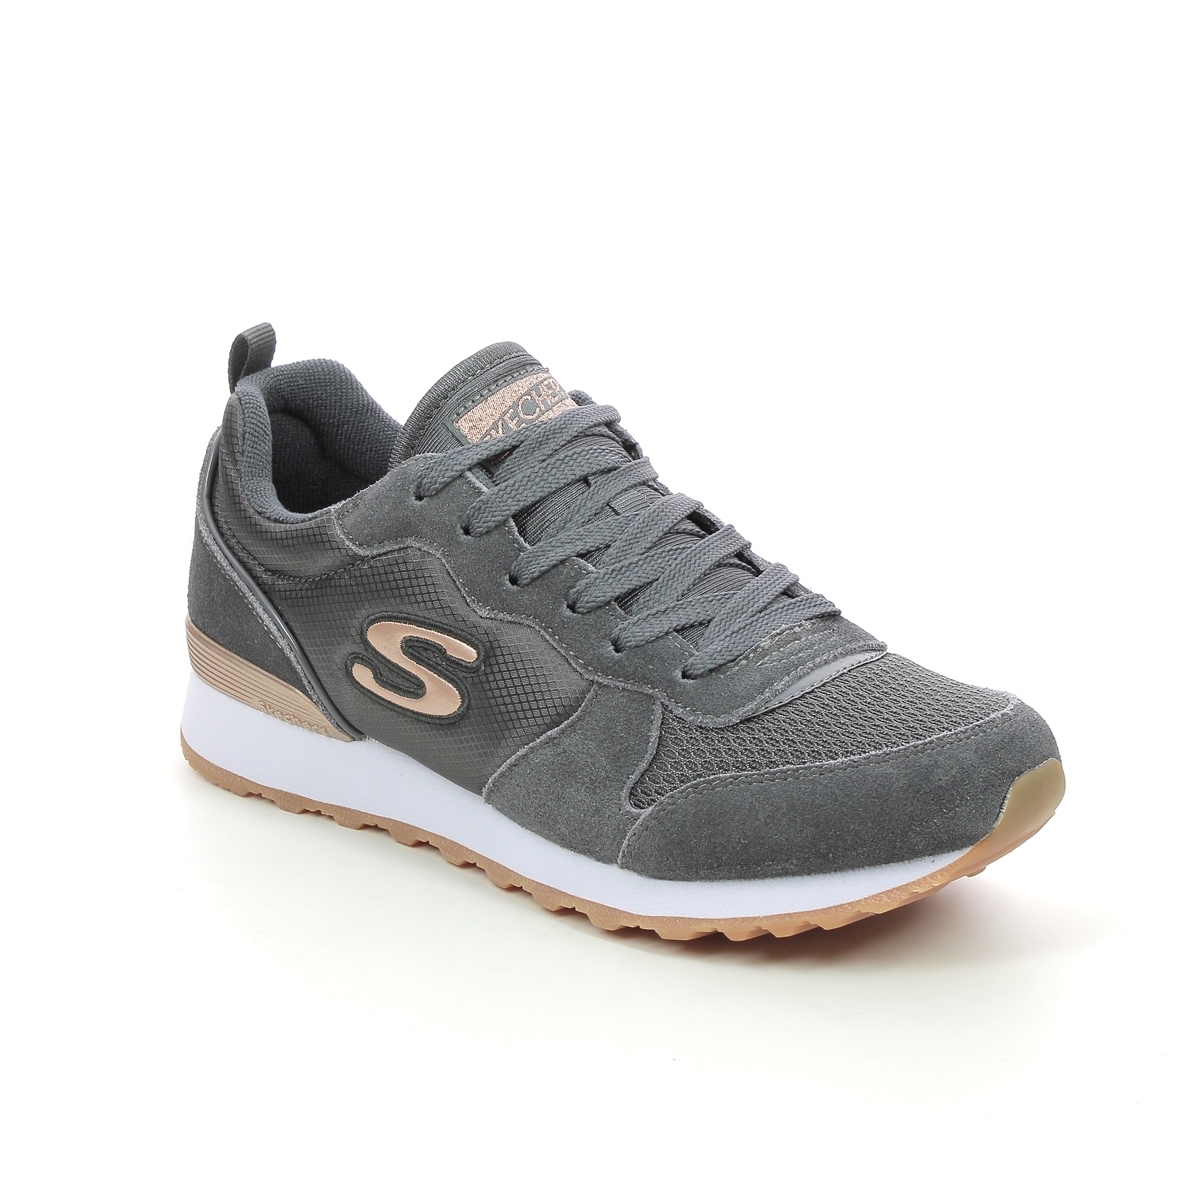 Cuerpo Incidente, evento Acompañar Skechers Og 85 Gold Gurl 111 CCL Charcoal trainers